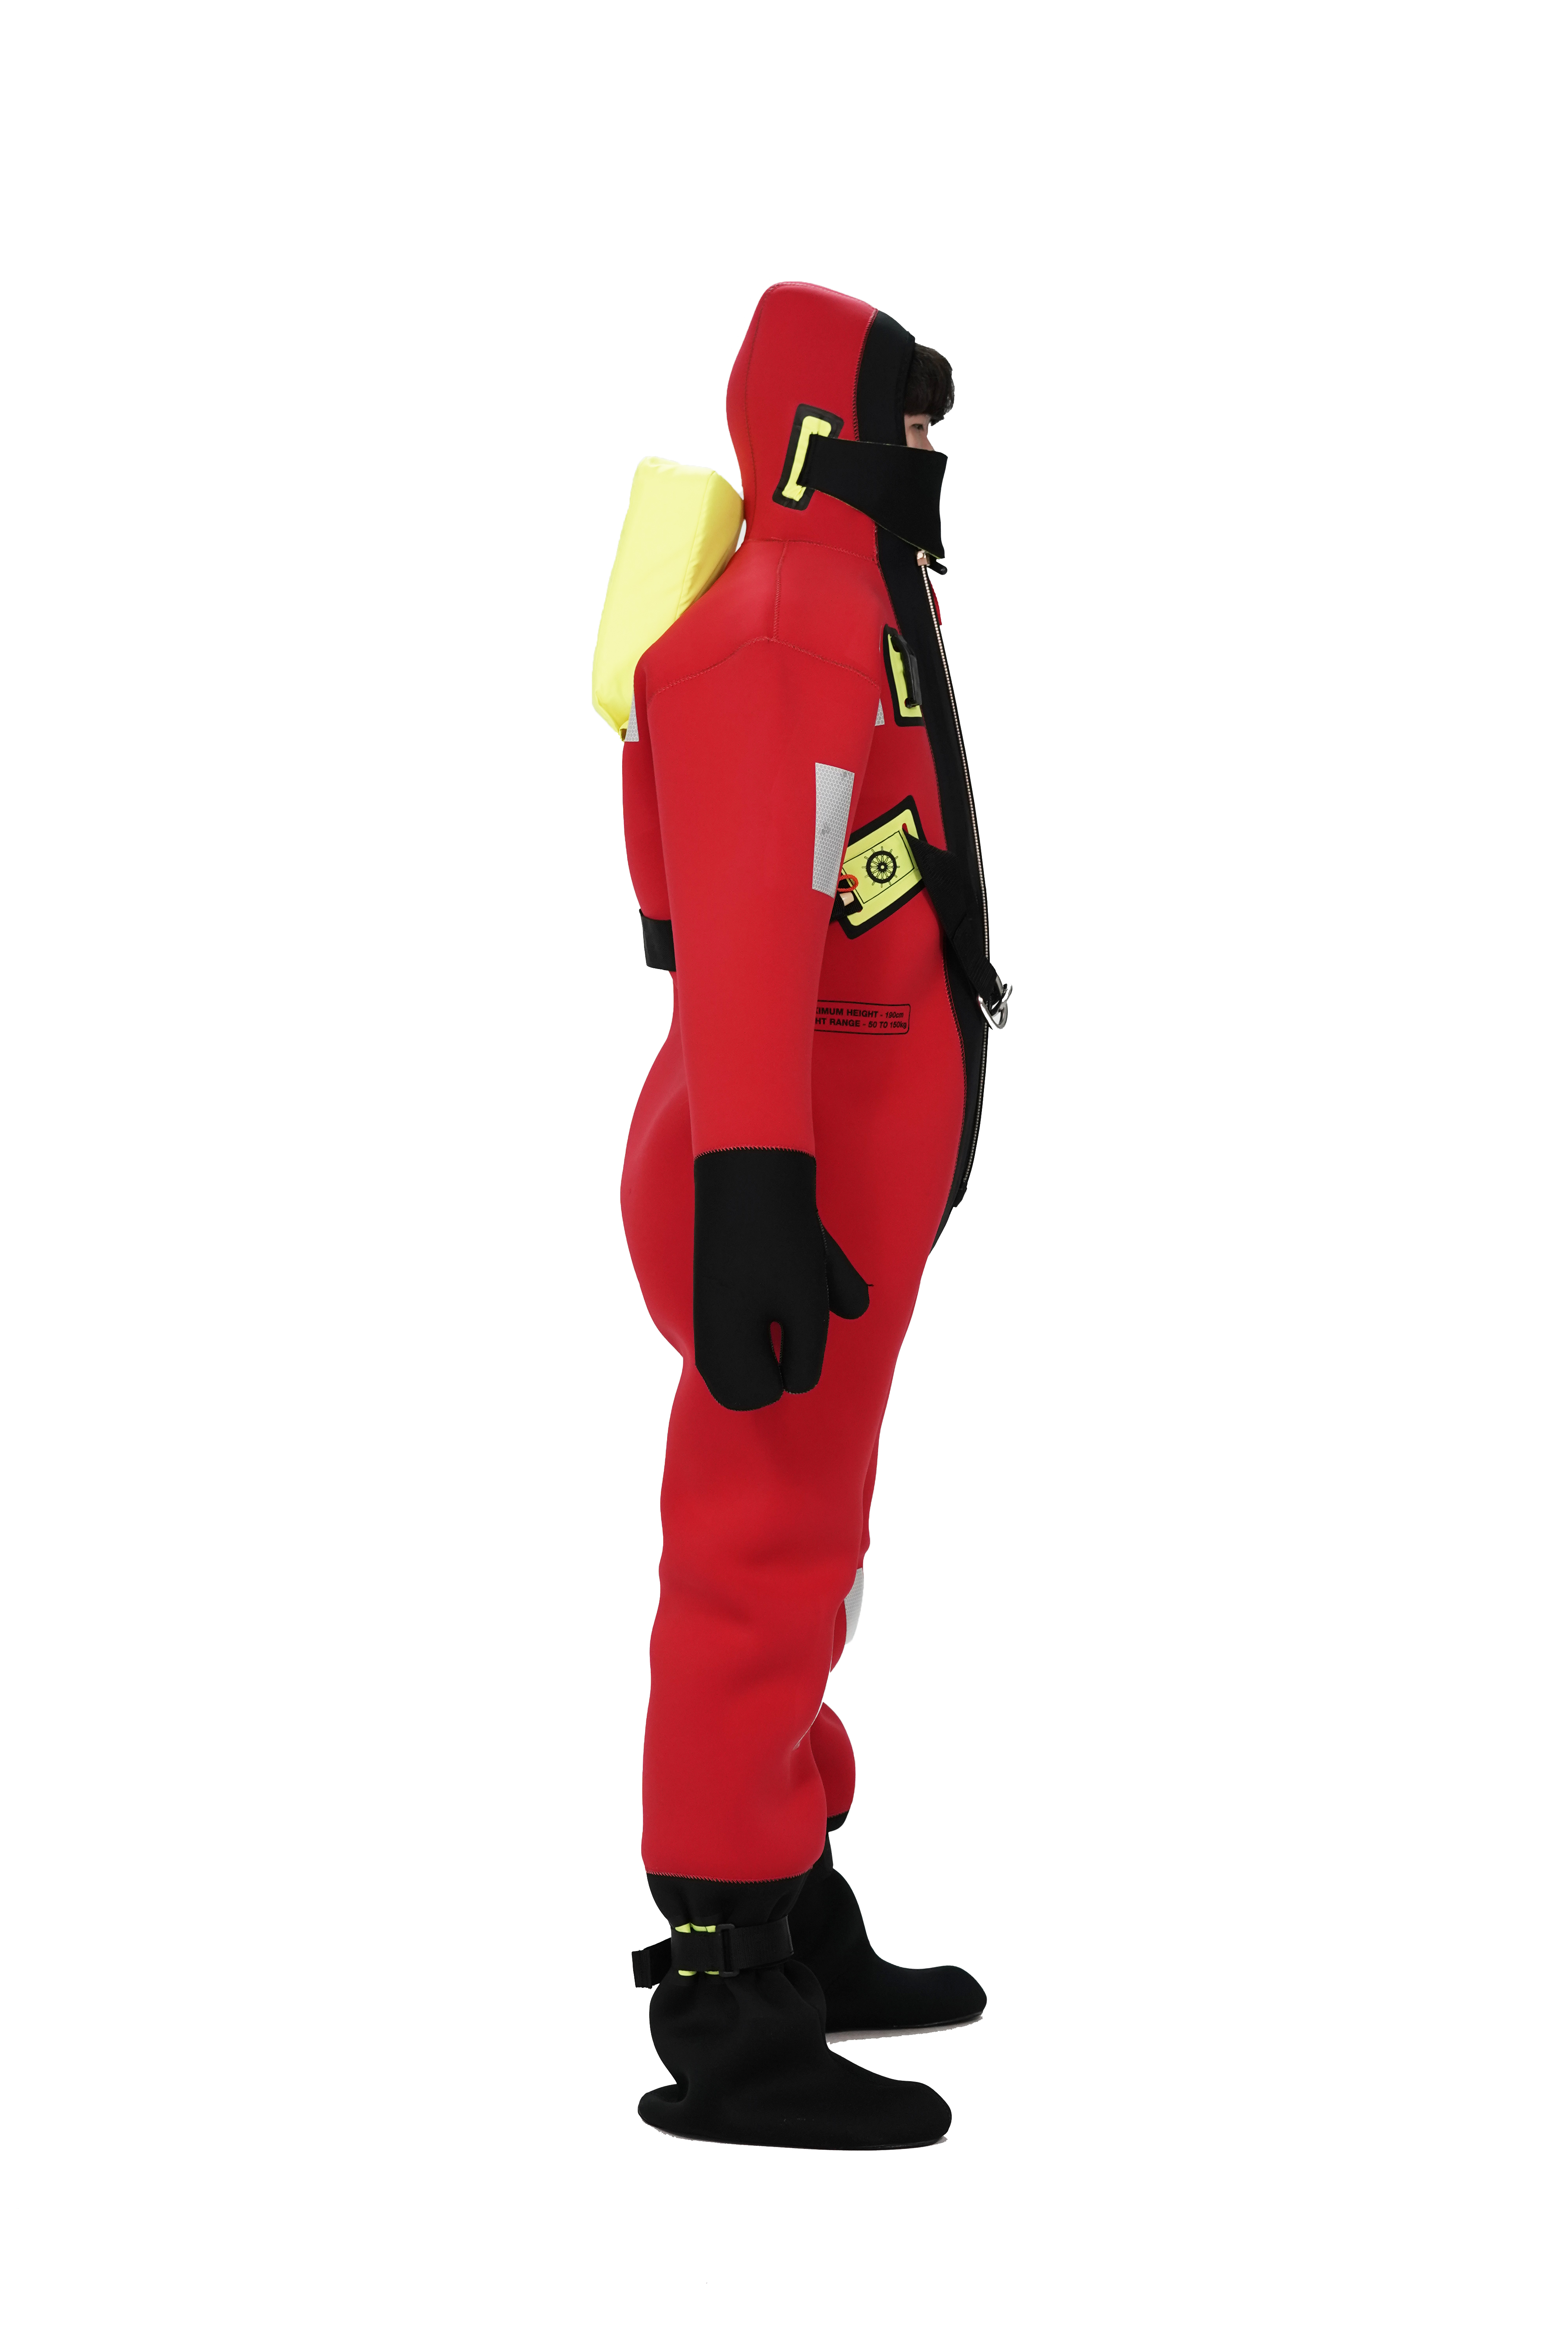 MER APPROVED INSULATED IMMERSION SUIT HYF-2-R